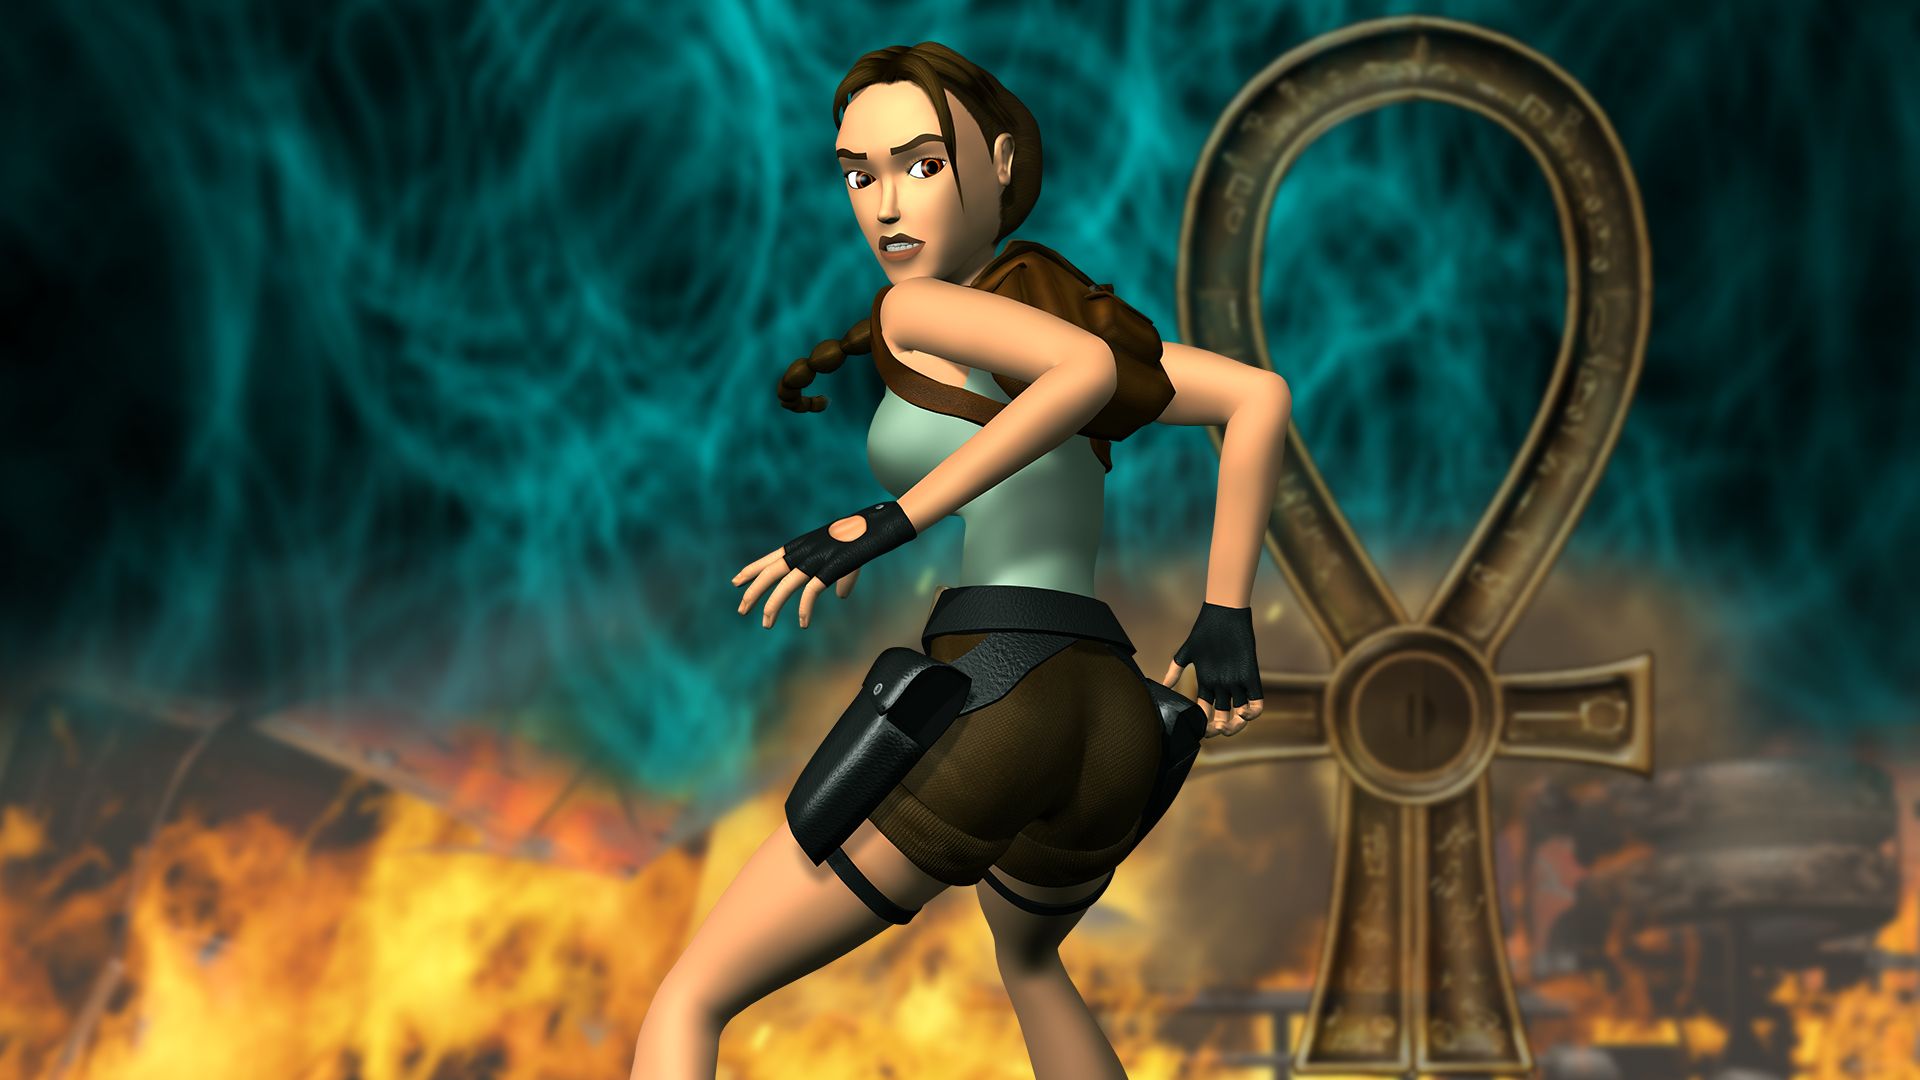 1920X1080 Tomb Raider 4 Wallpapers - Top Free Tomb Raider 4 Backgrounds...